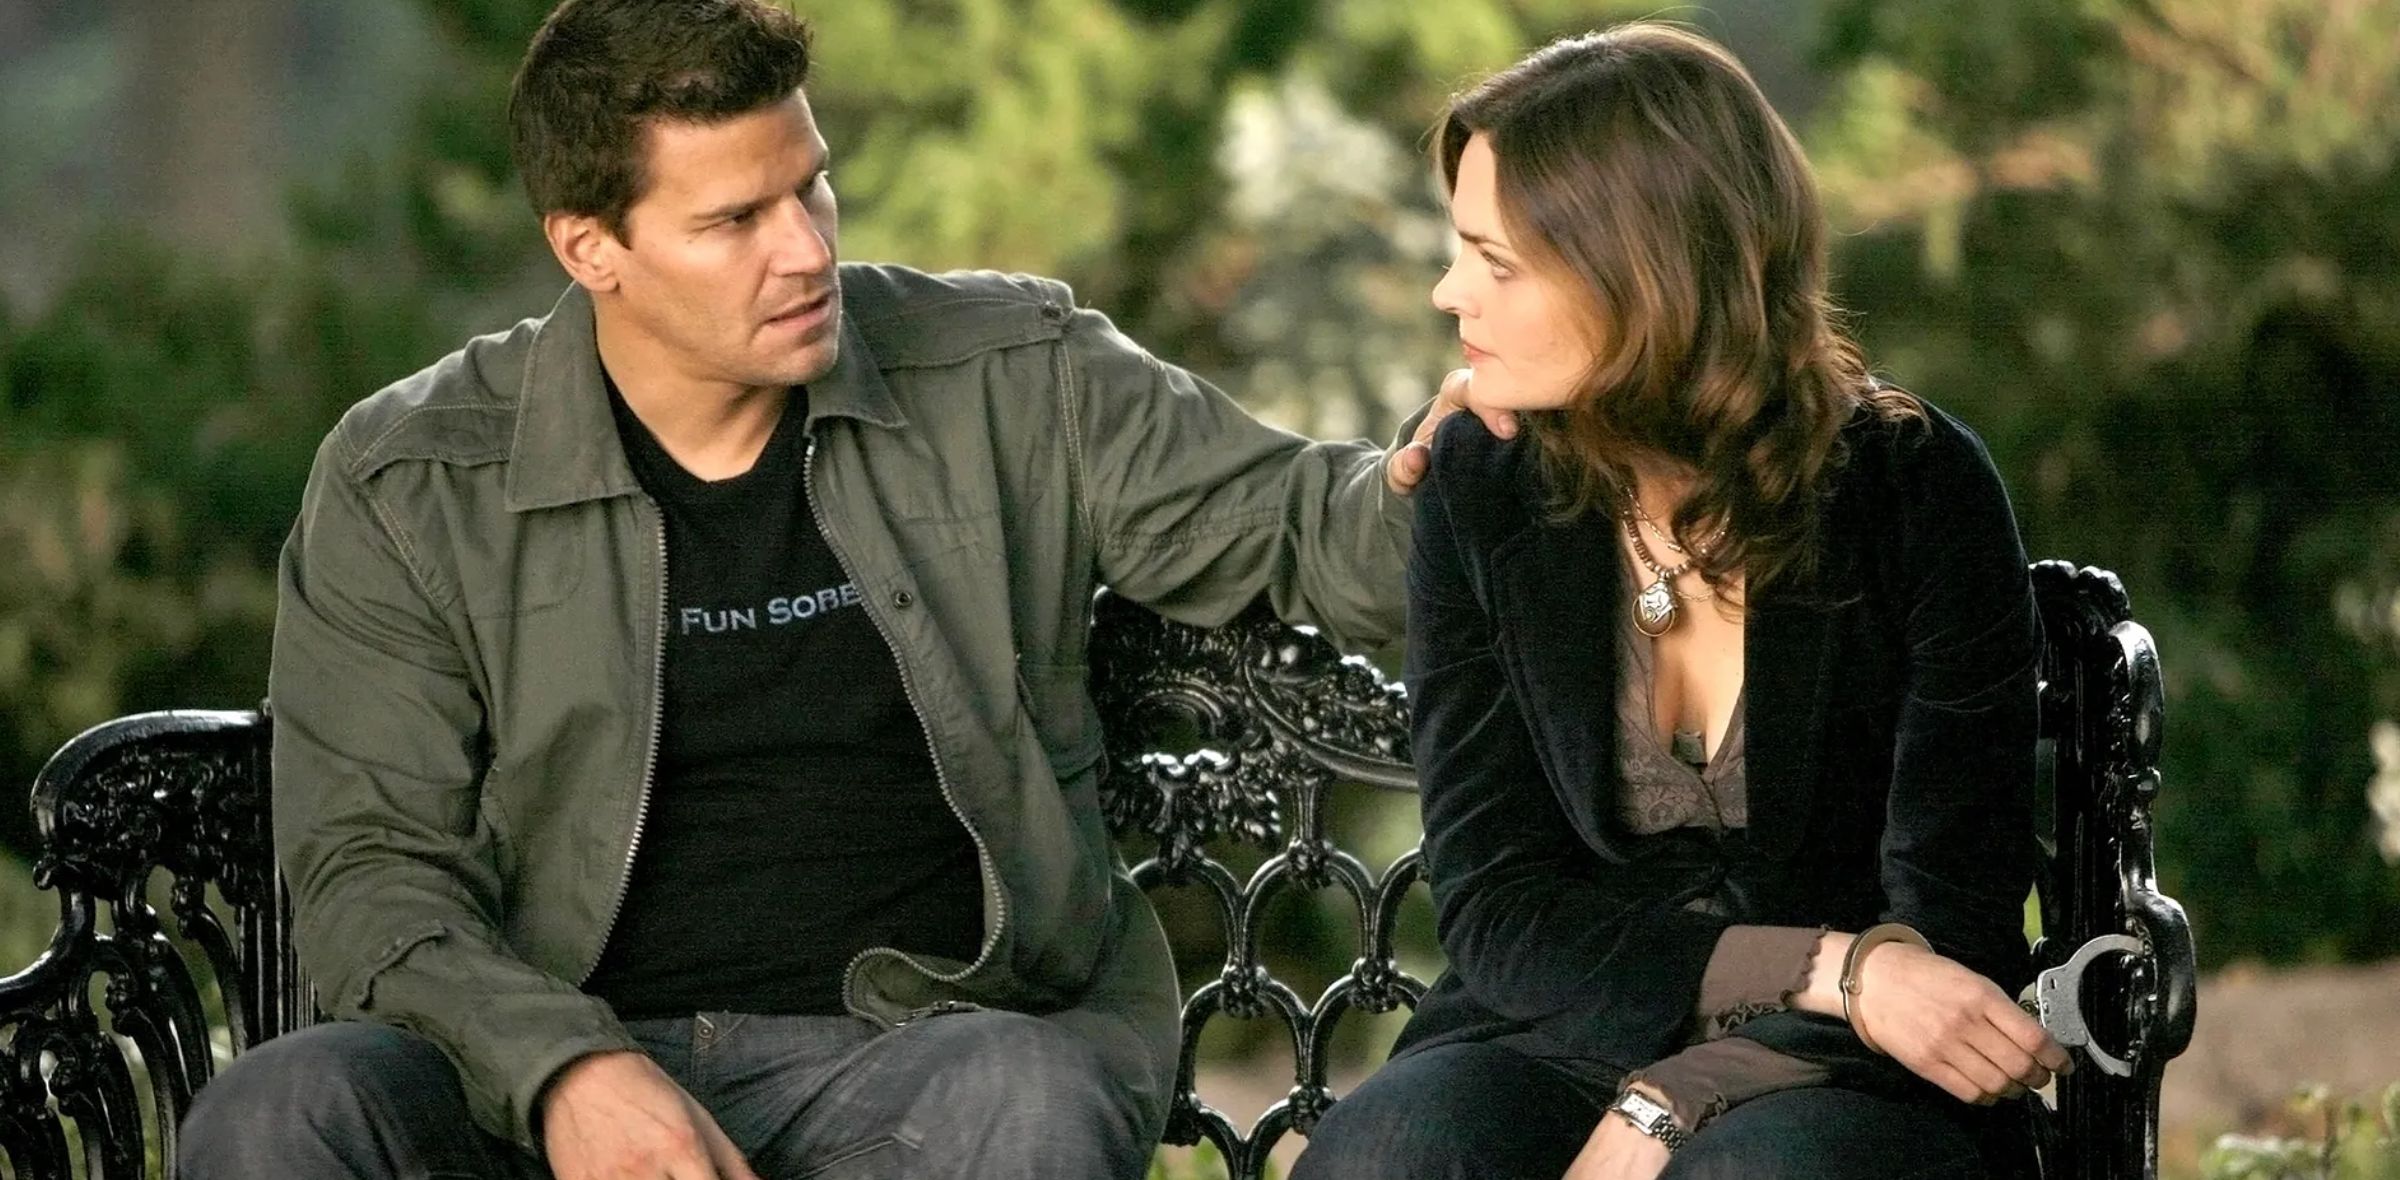 Brennan handcuffed to a park bench while Booth talks to her in Bones